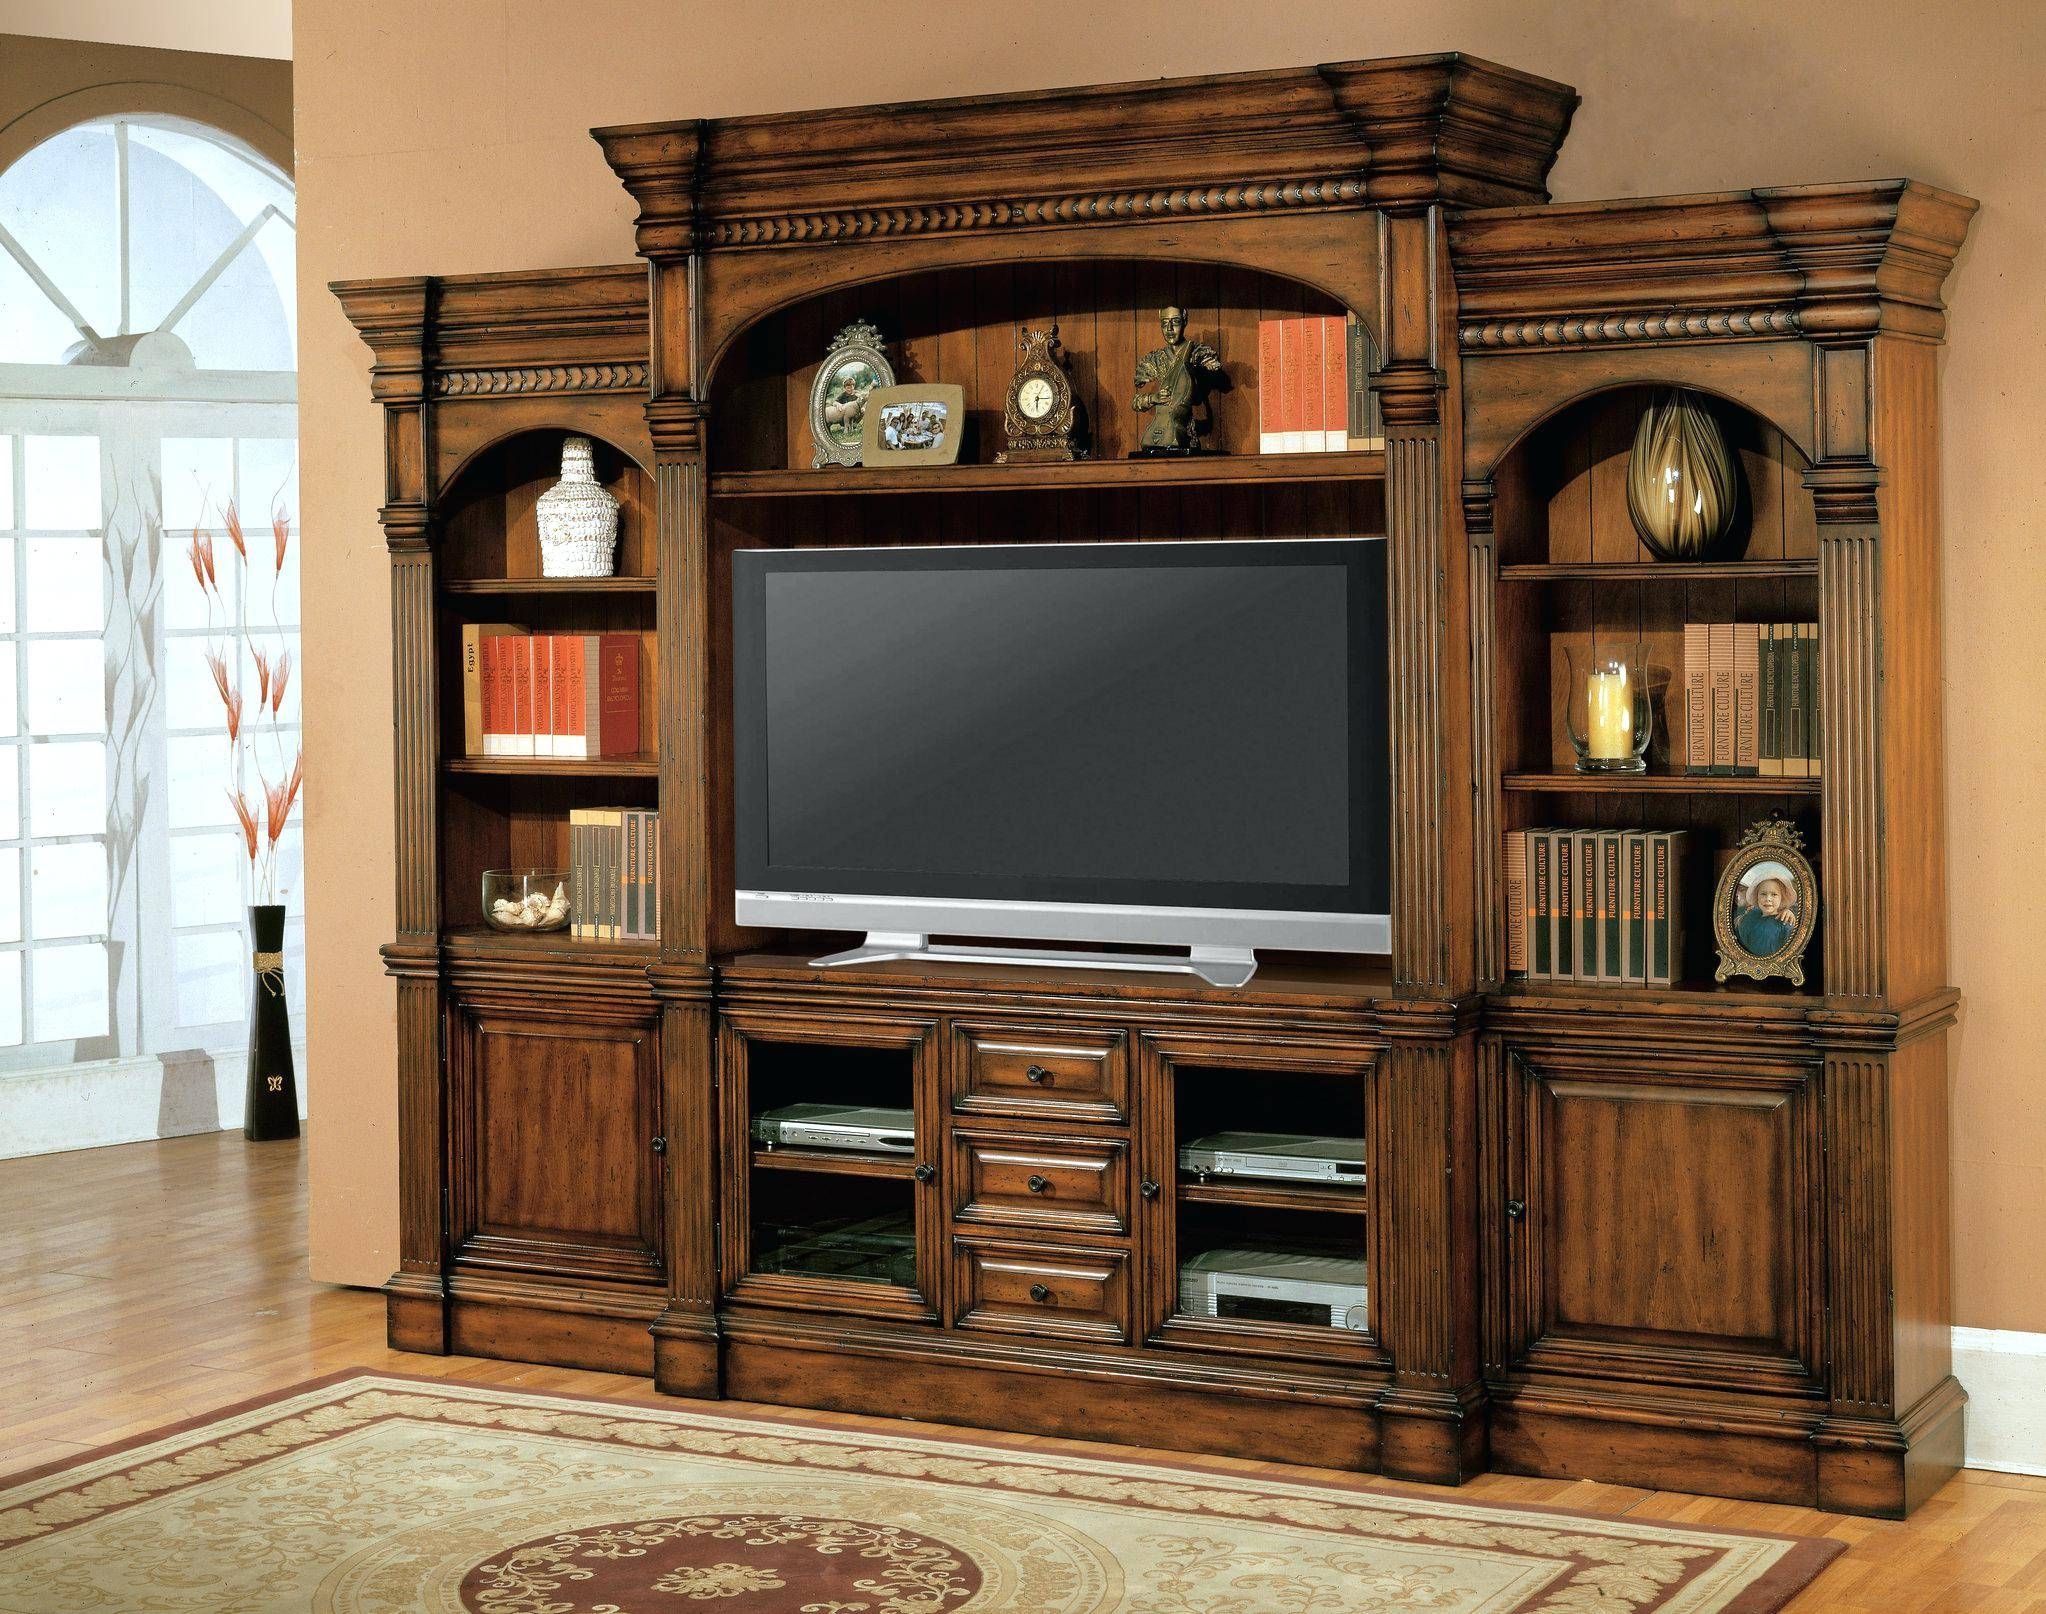 Tv Stand : Black Wooden Tv Stand Electric With Drawers And Shelfs Intended For Enclosed Tv Cabinets With Doors (View 15 of 15)